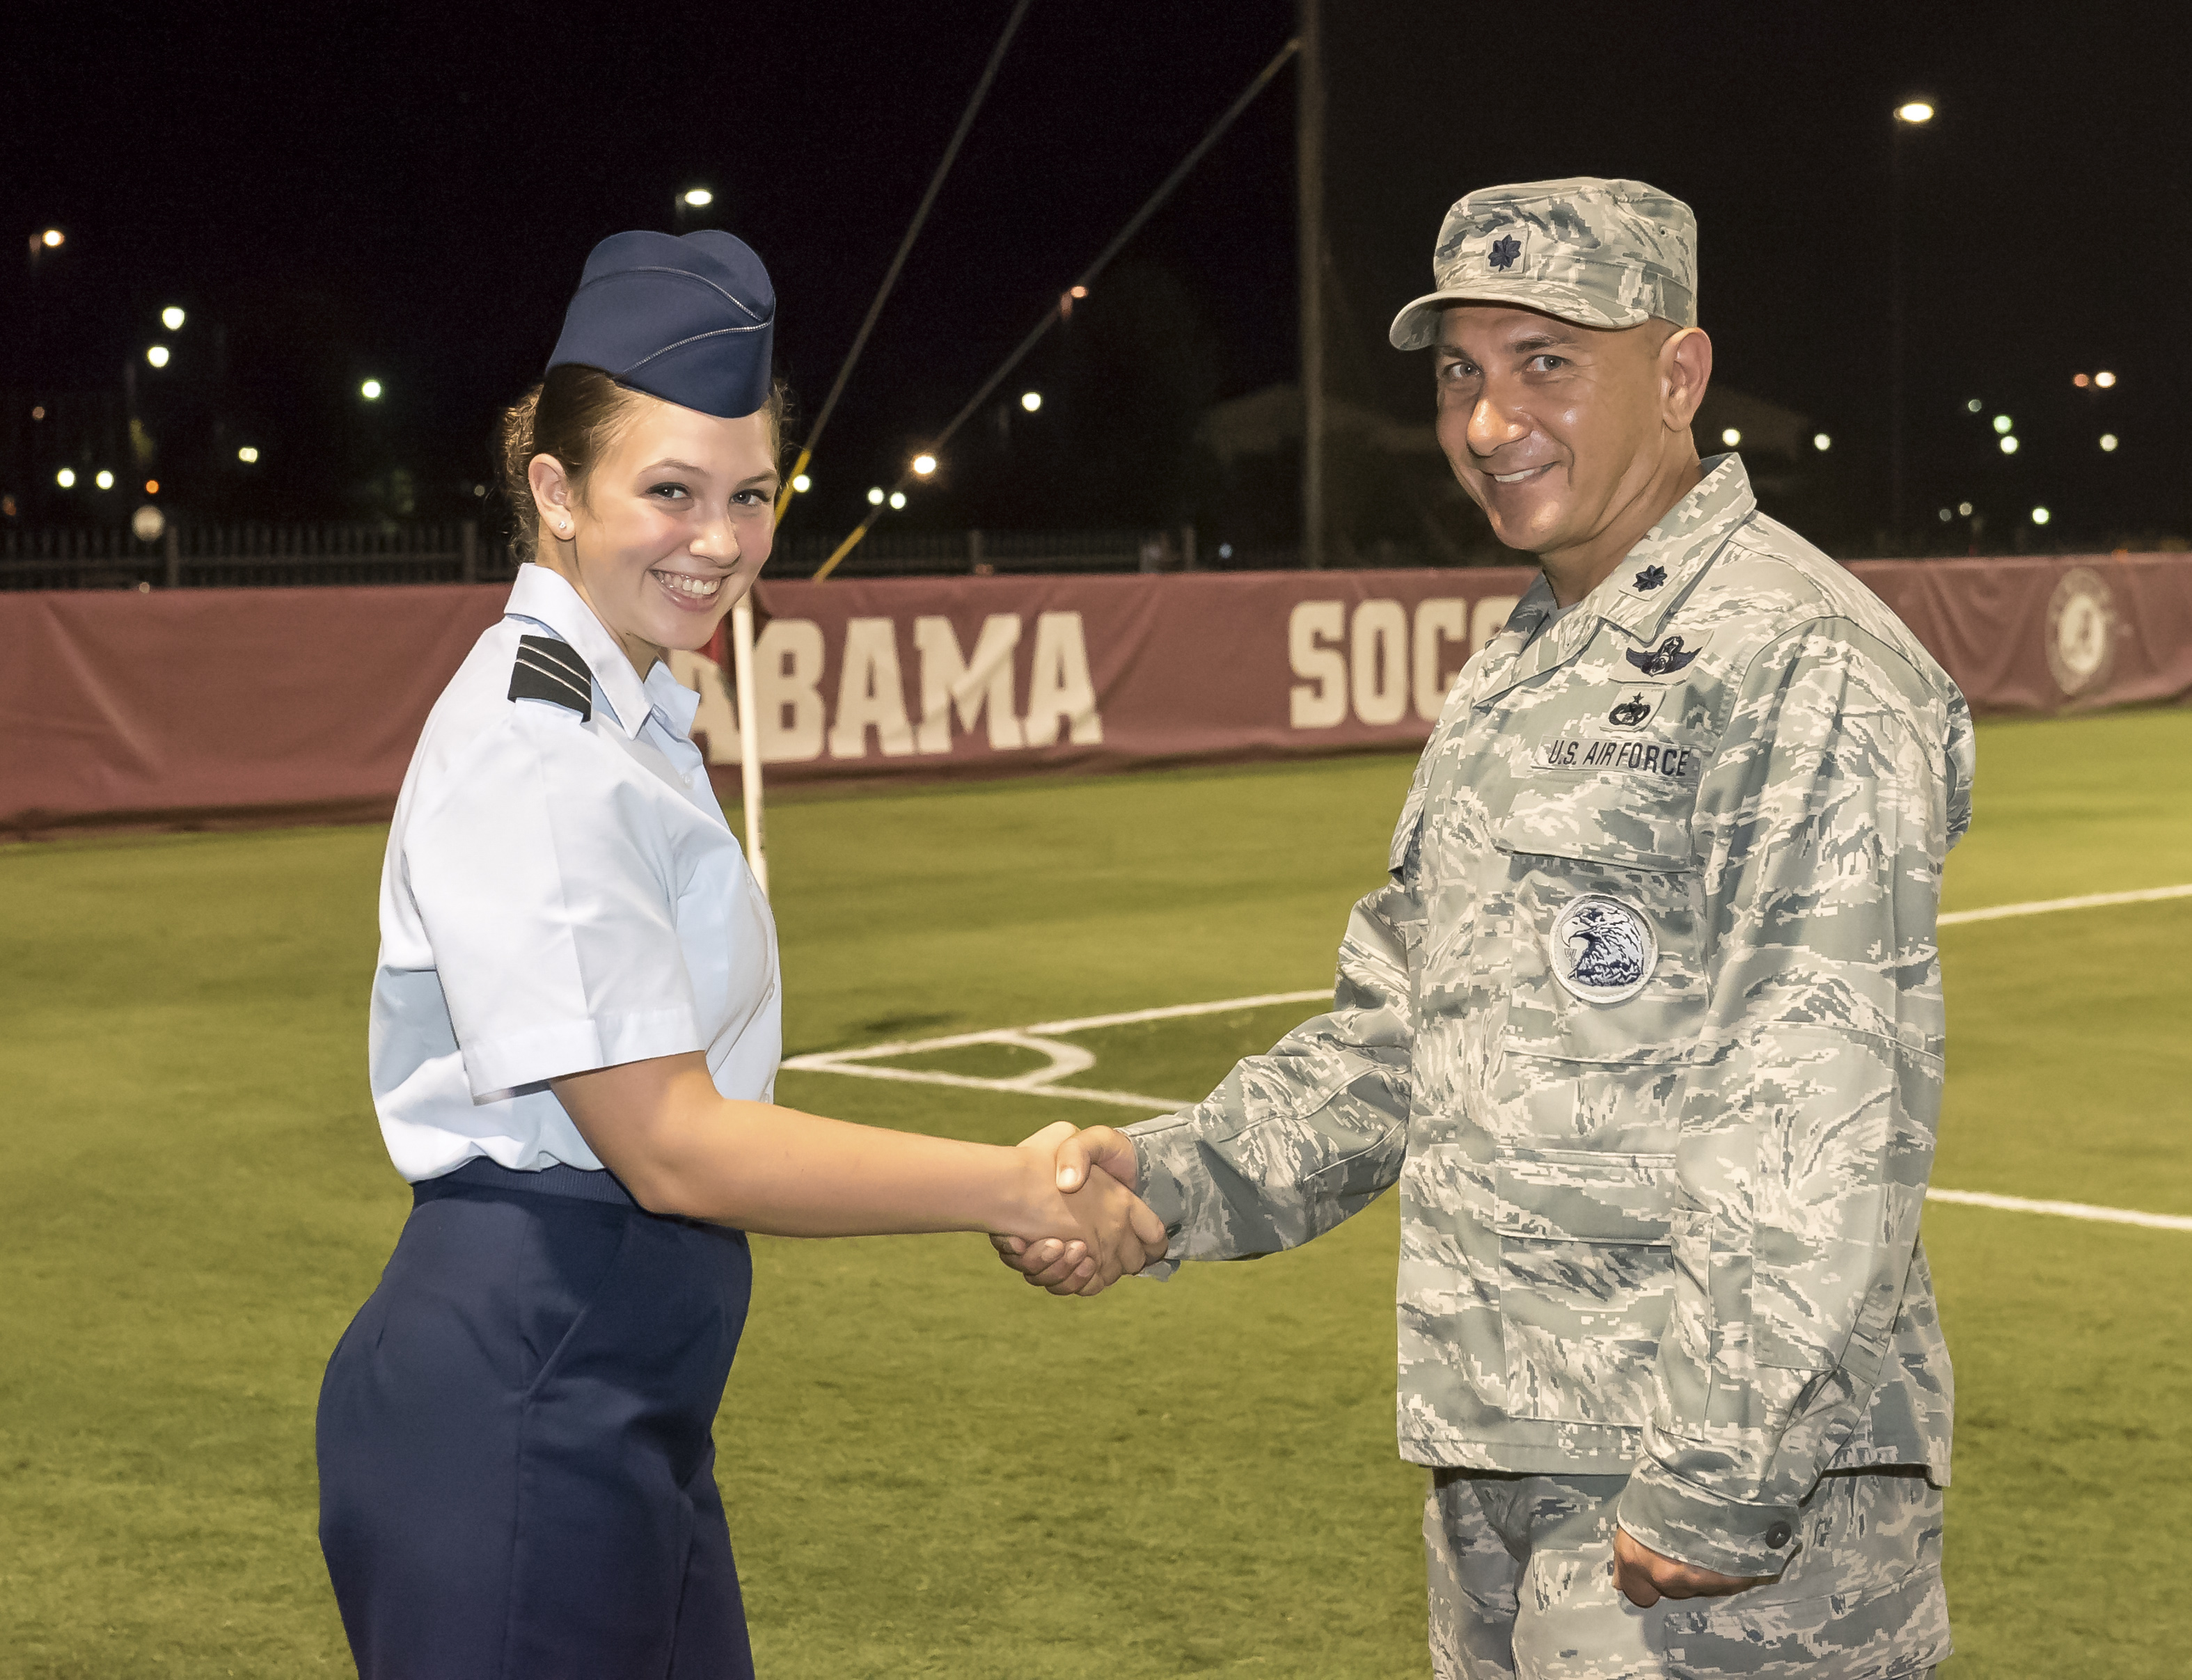 ‘Bama Salute’: AFROTC Swears In New Group of Cadets at Soccer Match